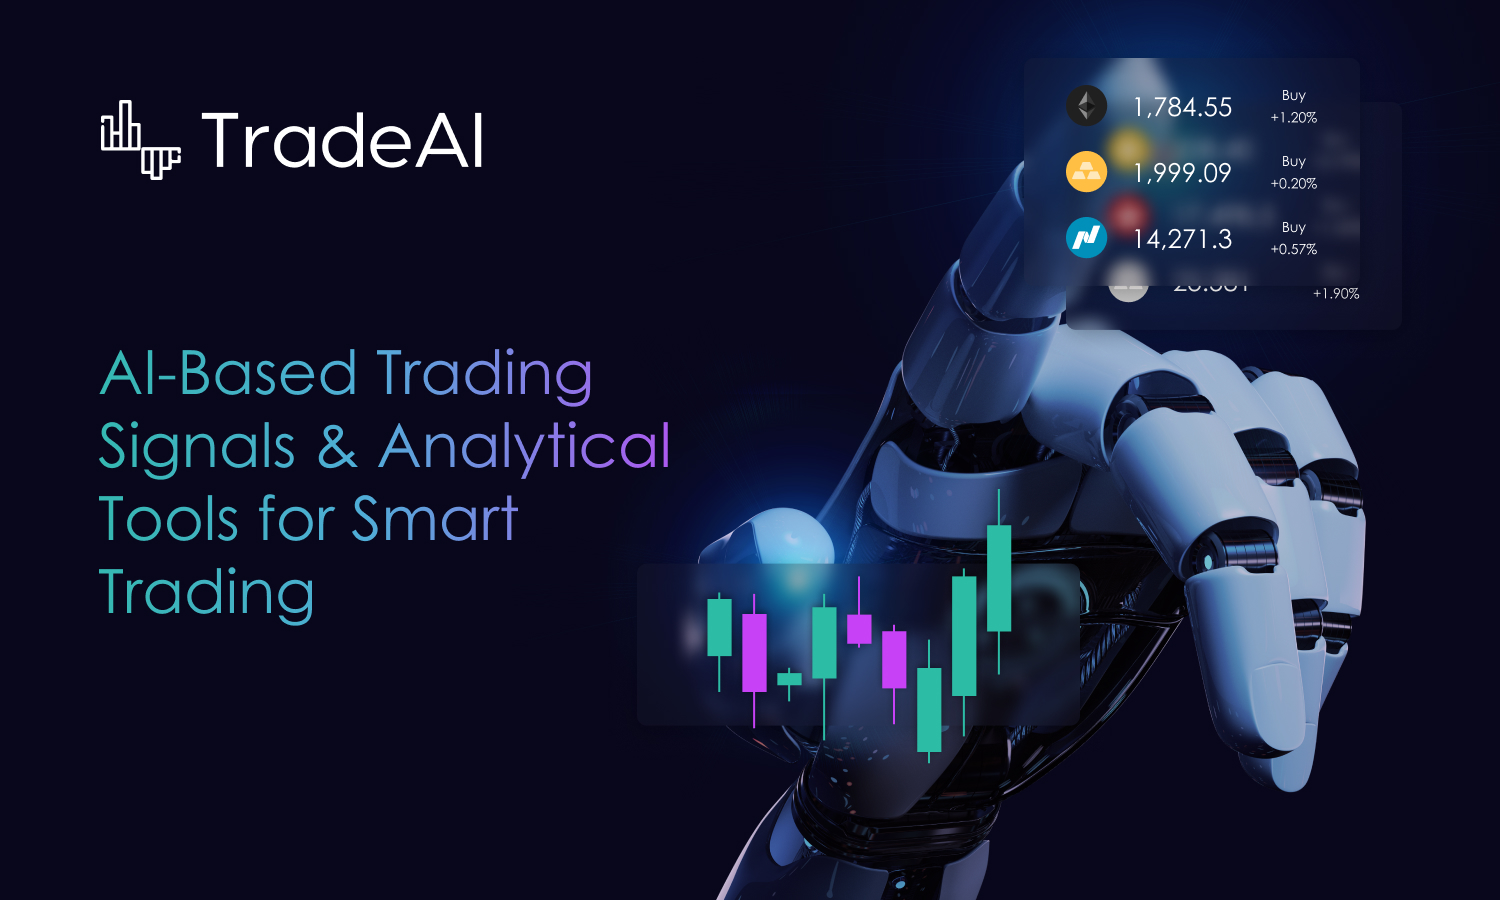 TradeWire Explained: AI-Based Analytical Tools for Smart Trading